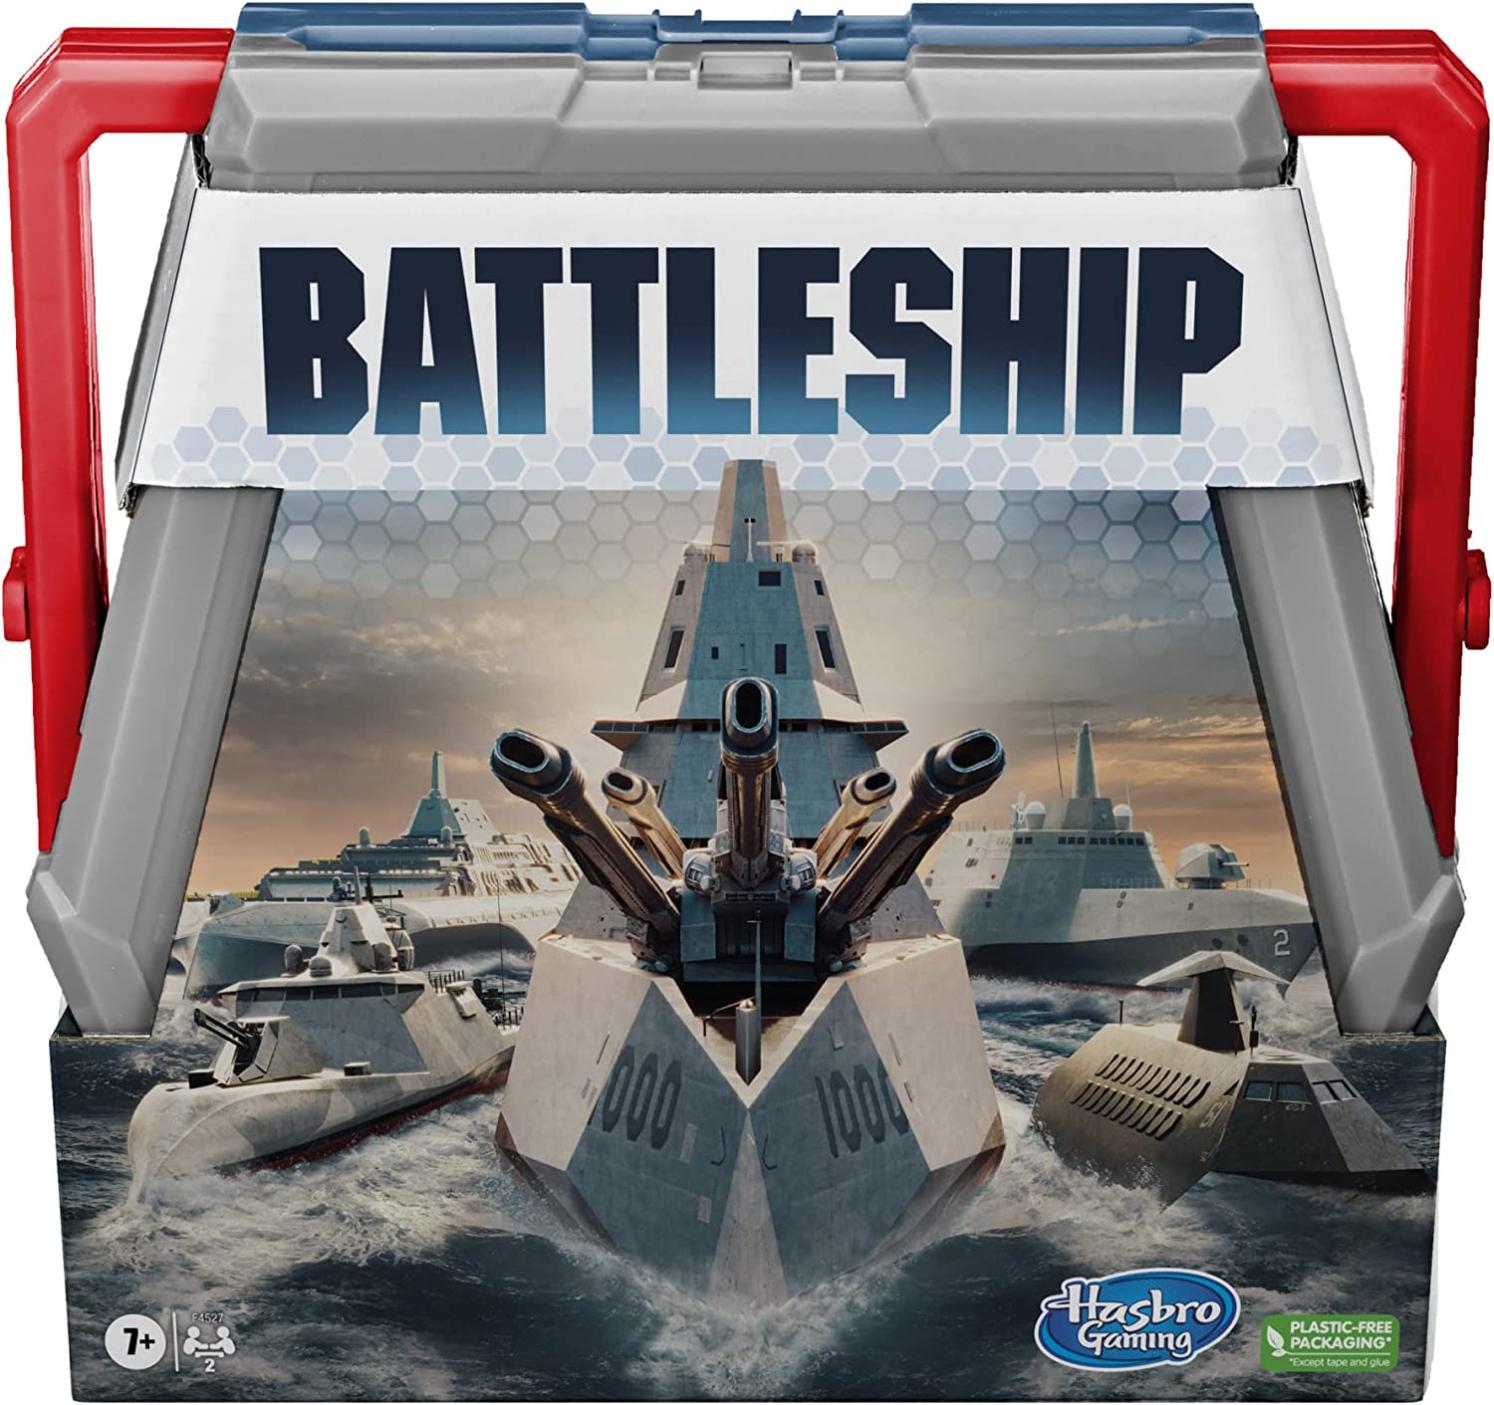 Hasbro Gaming Battleship Classic Board Game, Strategy Game for Kids Ages 7 and Up, Fun Kids Game for 2 Players